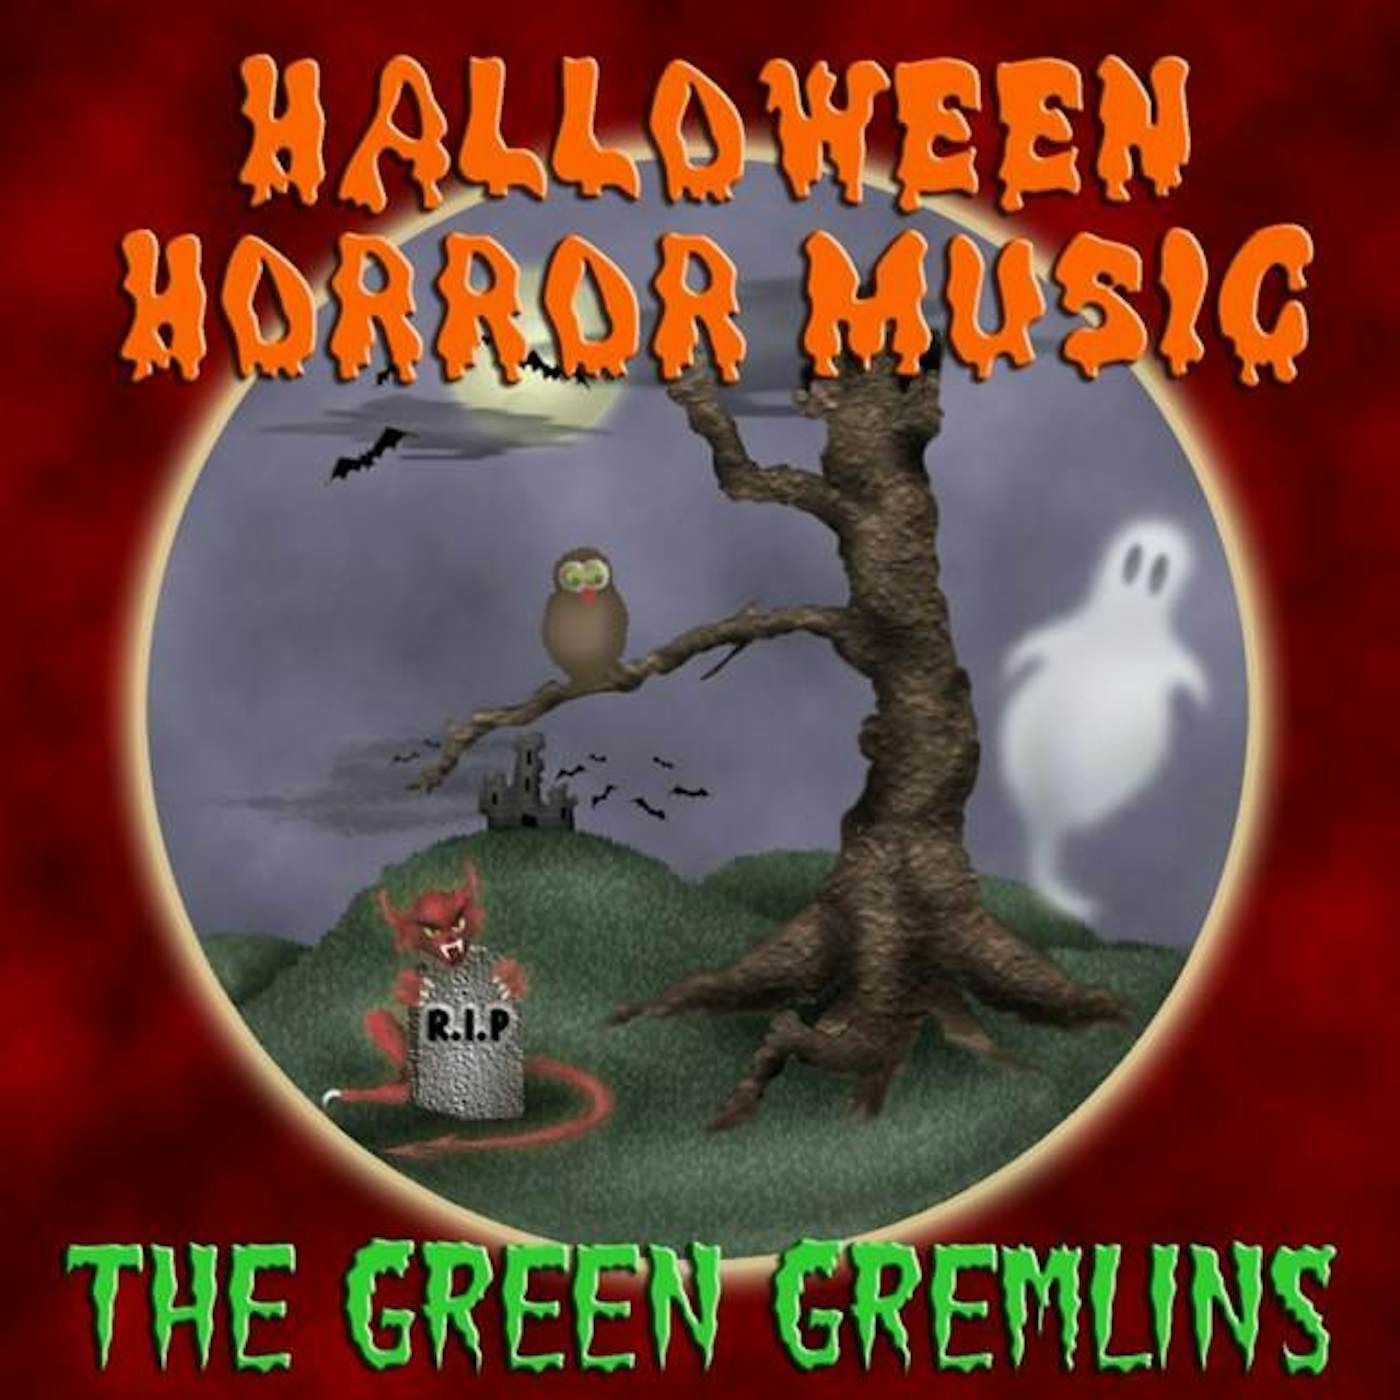 The Green Gremlins